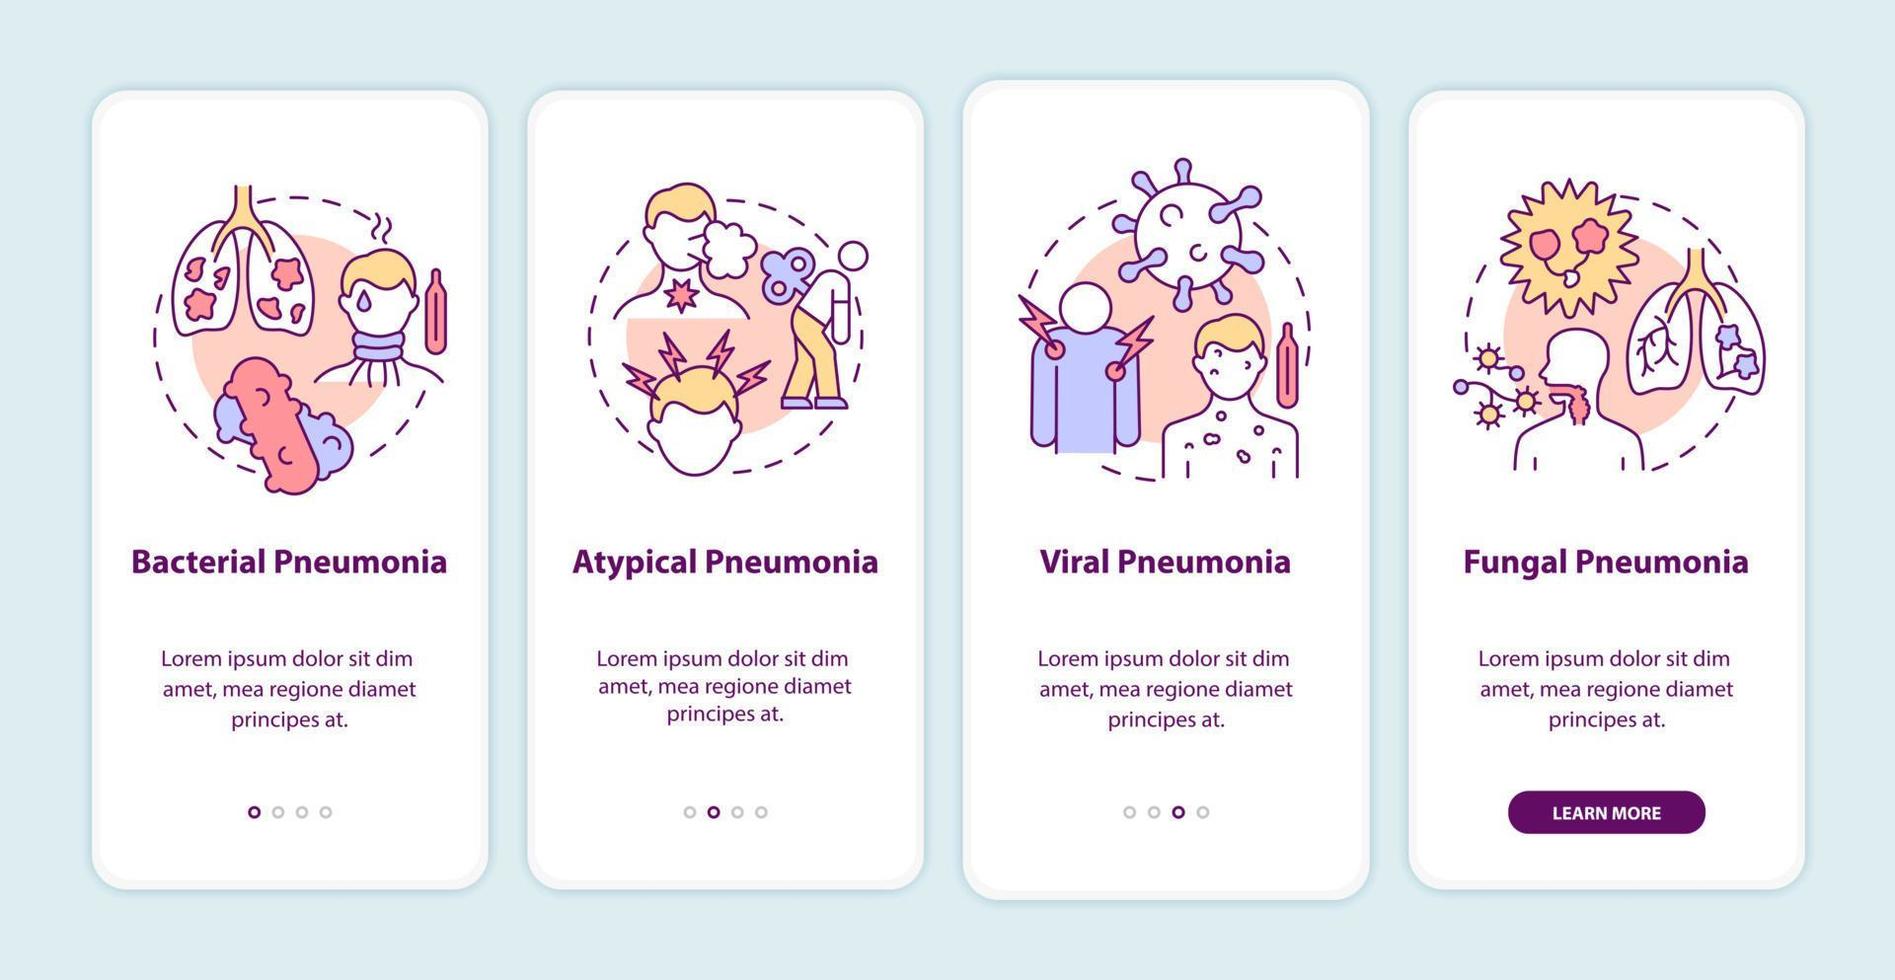 Pneumonia types onboarding mobile app page screen. Bacterial and viral infections walkthrough 4 steps graphic instructions with concepts. UI, UX, GUI vector template with linear color illustrations